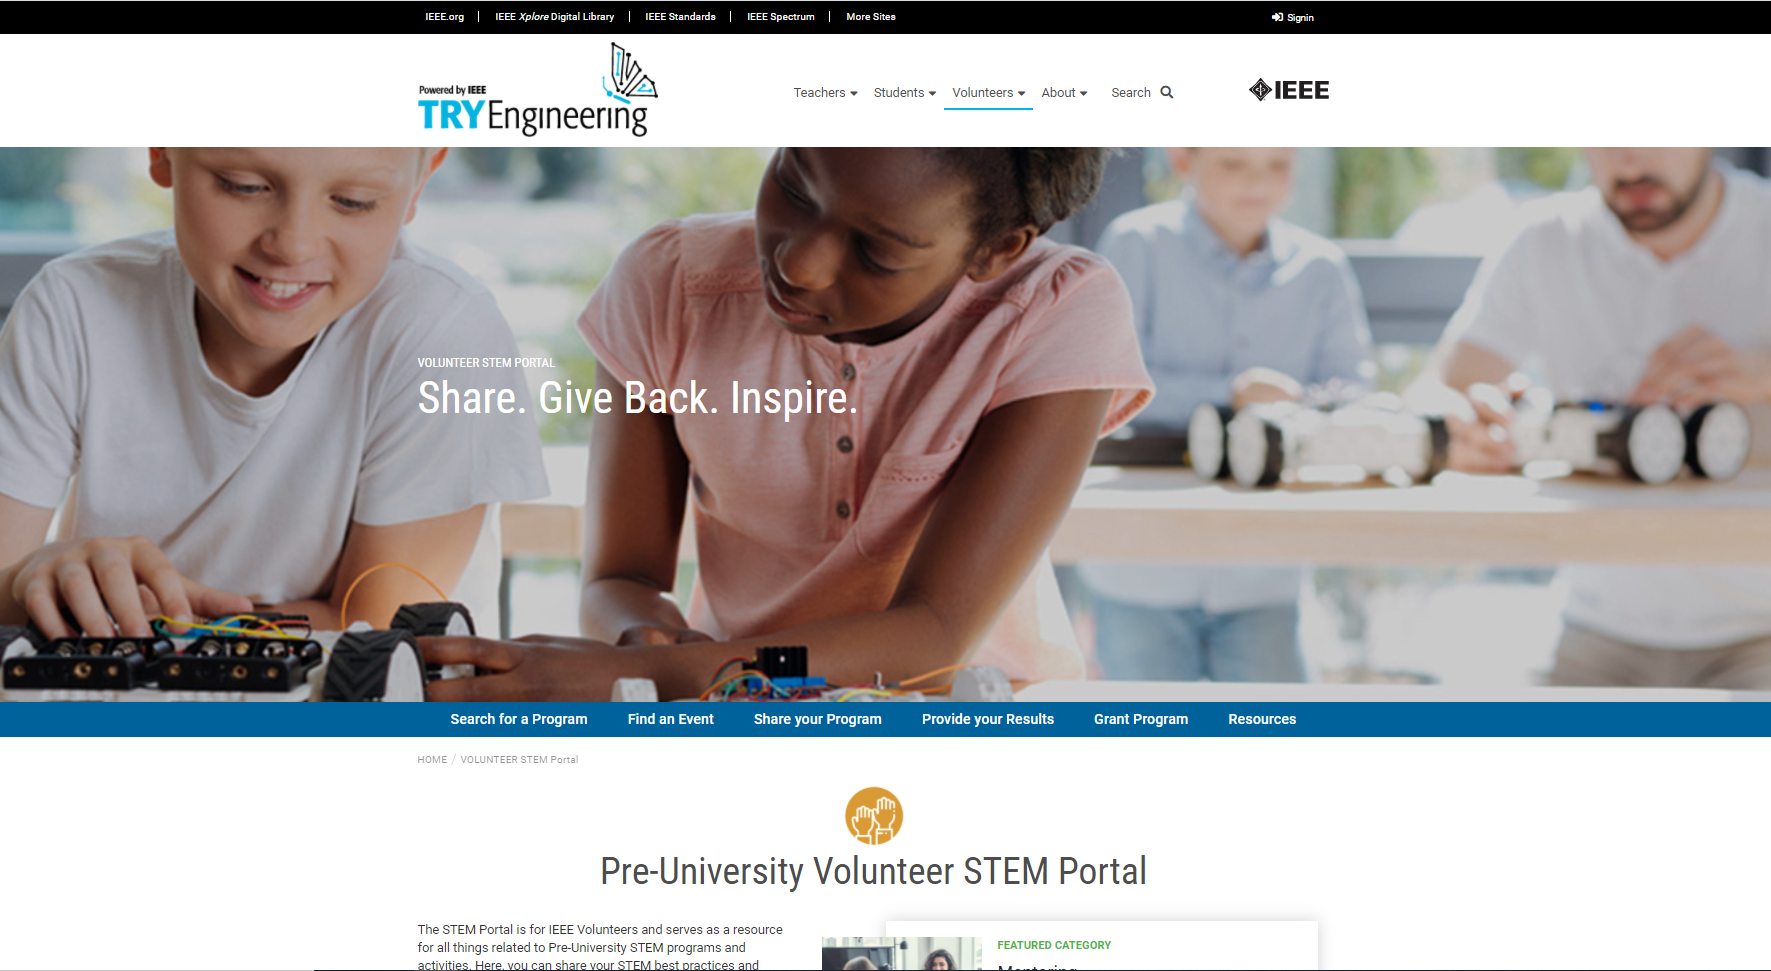 image showing home page of the pre-university volunteer STEM portal